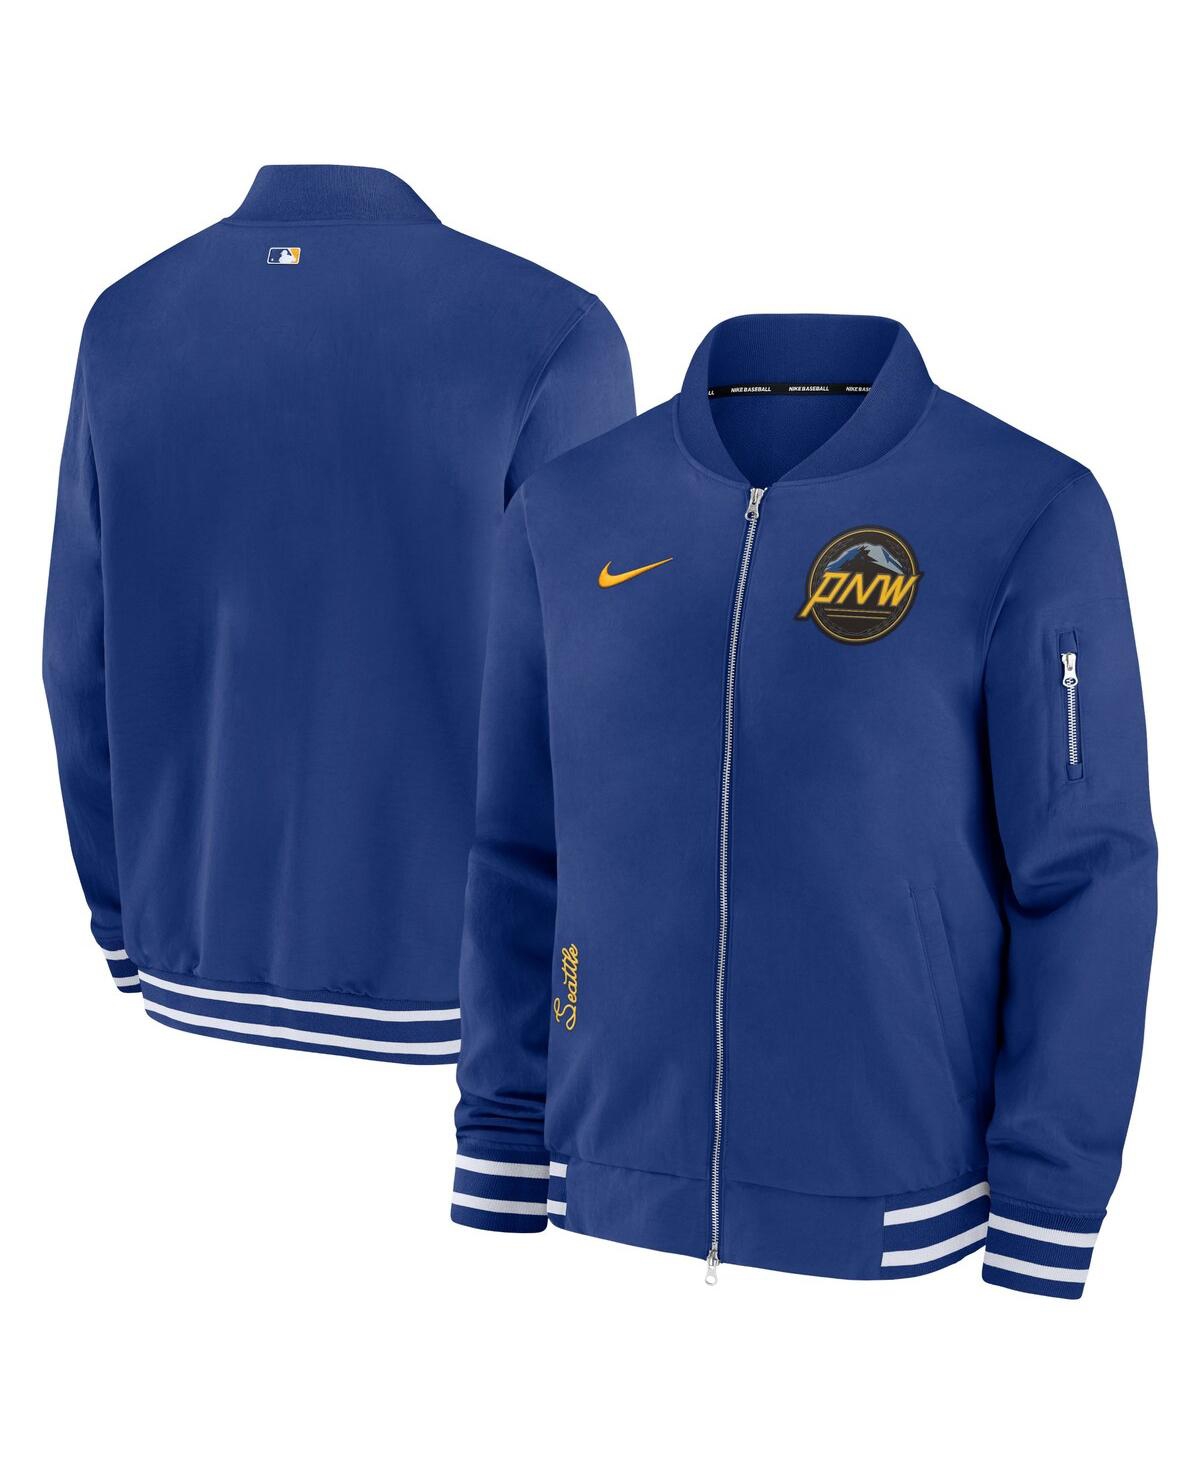 Men's Nike Royal Seattle Mariners Authentic Collection Game Time Bomber Full-Zip Jacket - Royal